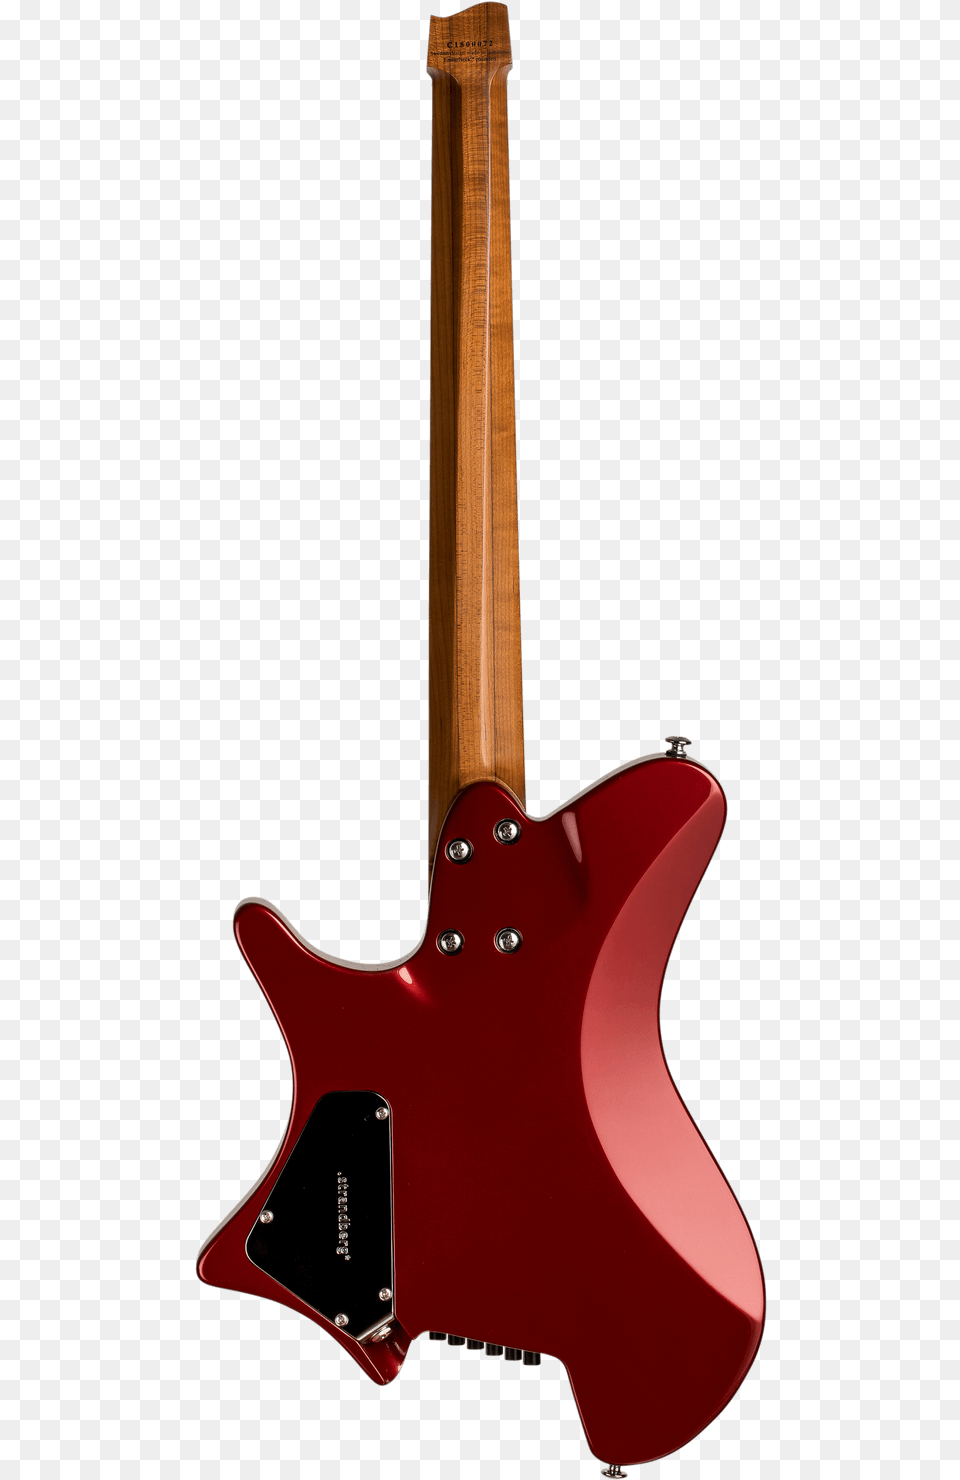 Slen Deluxe Candy Apple Red Boden, Electric Guitar, Guitar, Musical Instrument Free Transparent Png